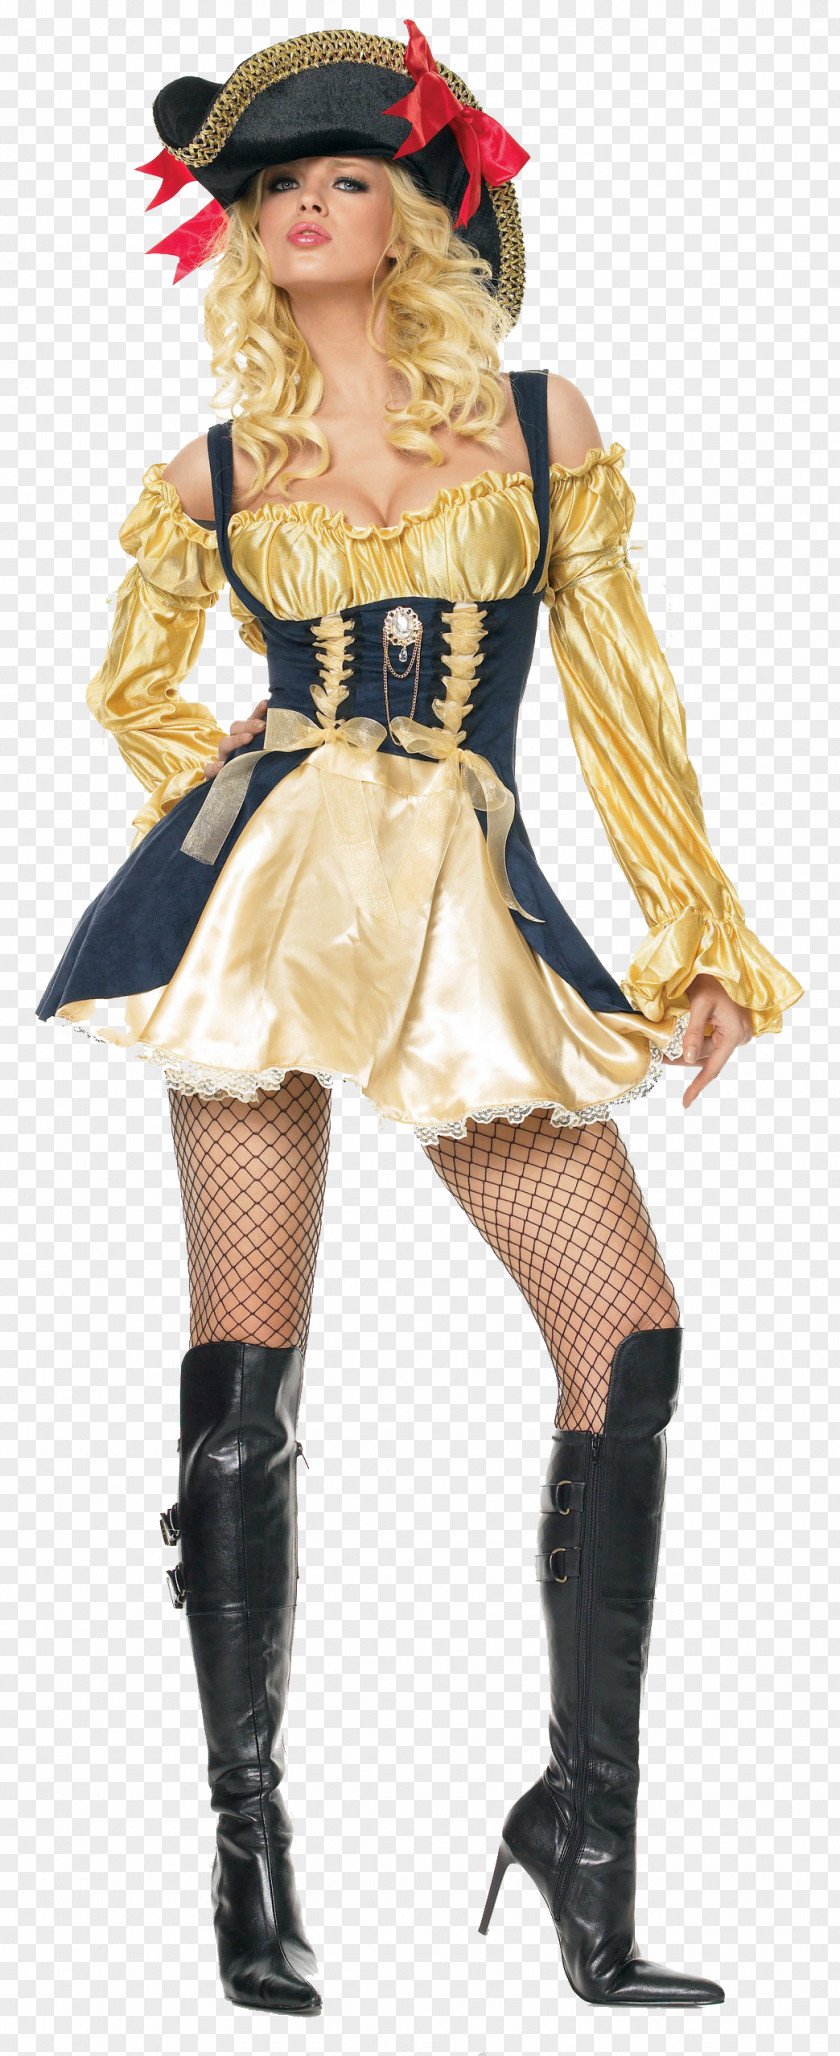 Pirate Jack Sparrow Halloween Costume Pirates Of The Caribbean Lady Pirata PNG